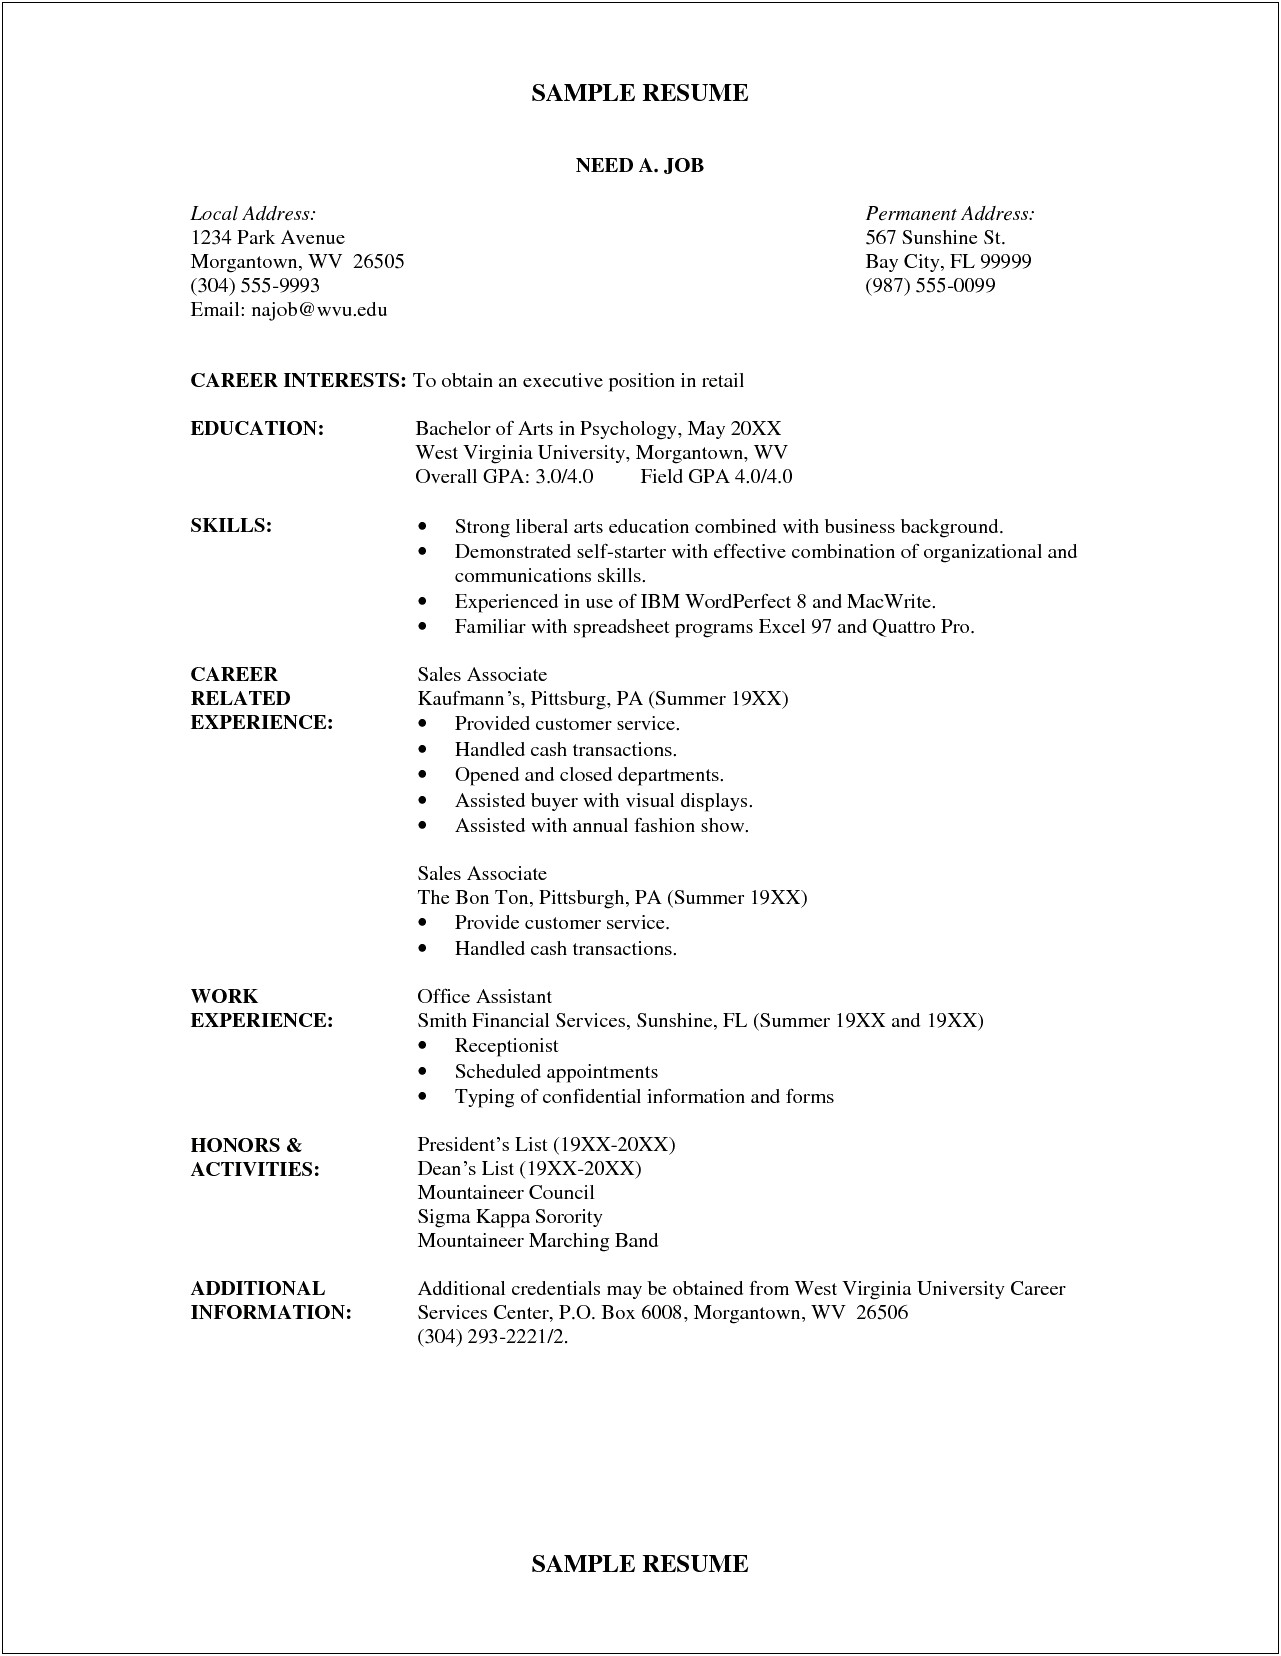 Resume Examples With Current Job